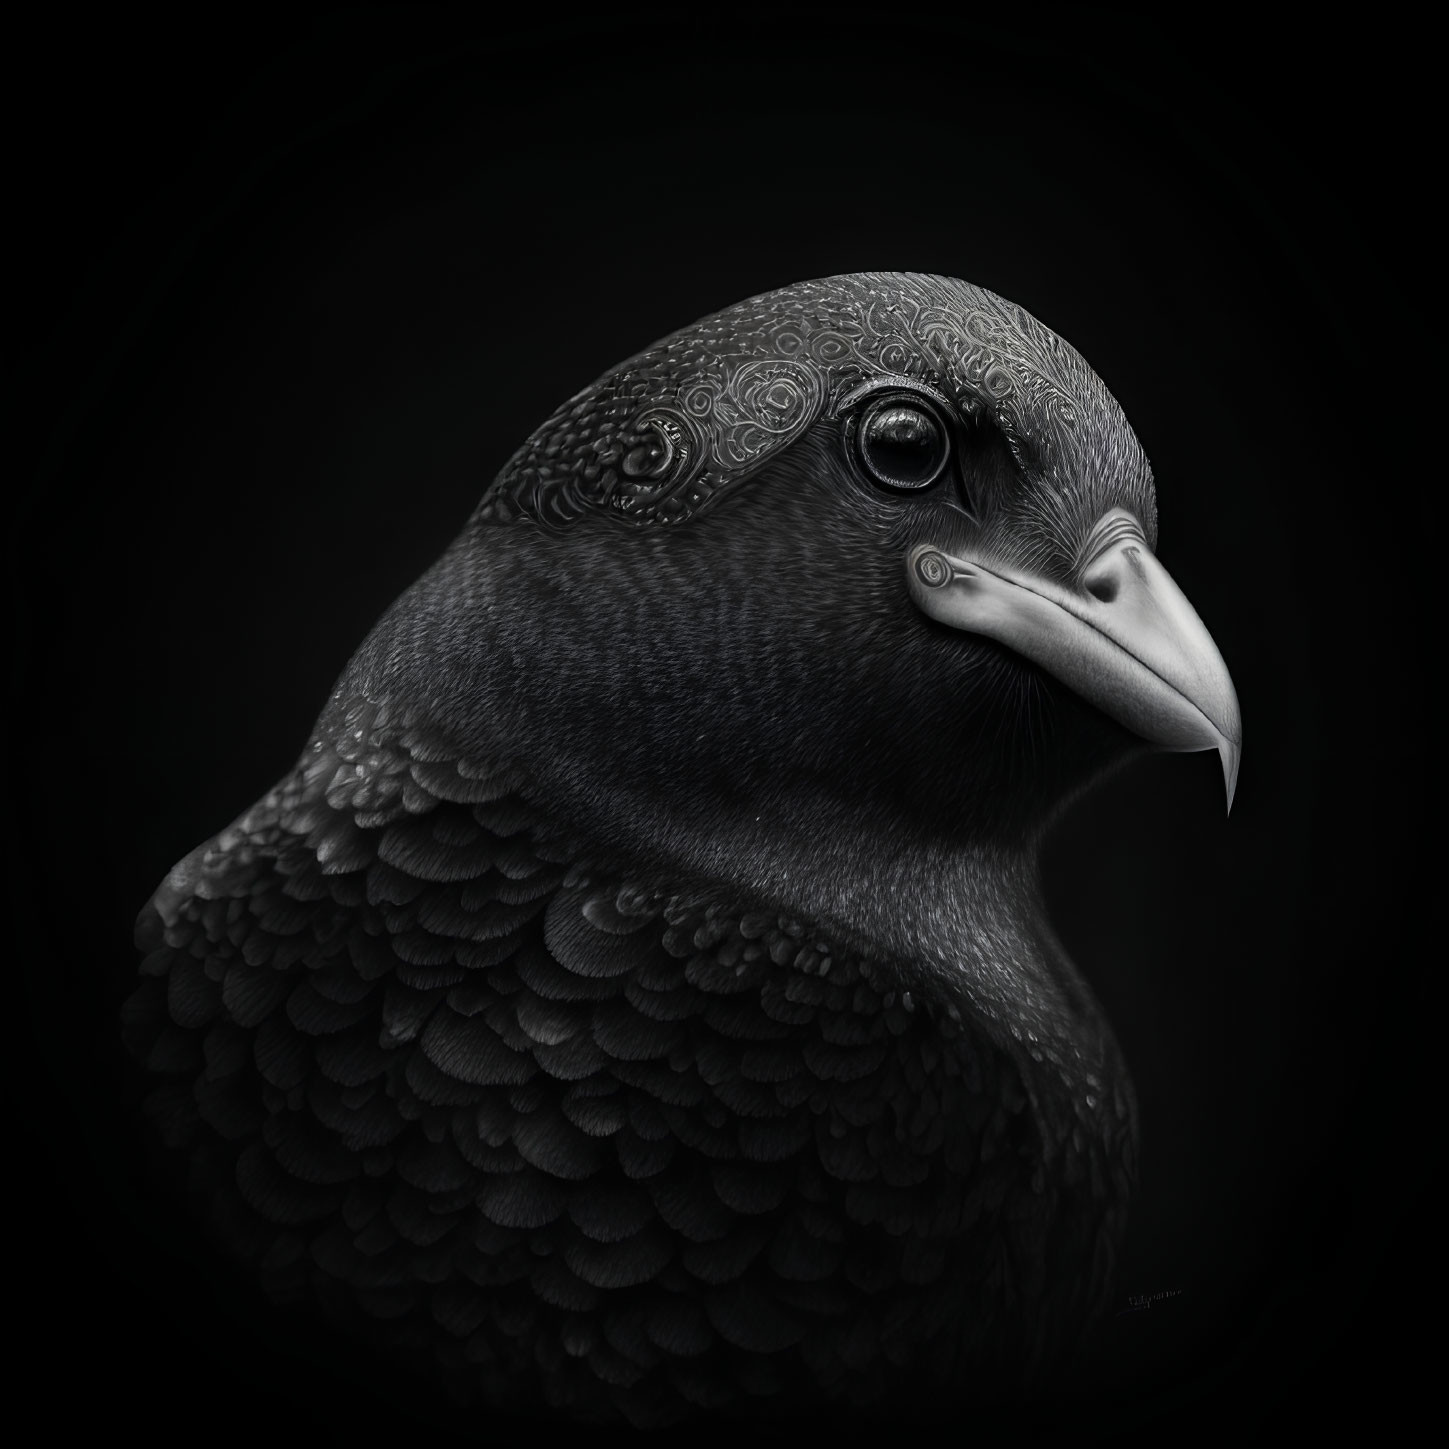 Monochrome pigeon with intricate feather patterns on dark background